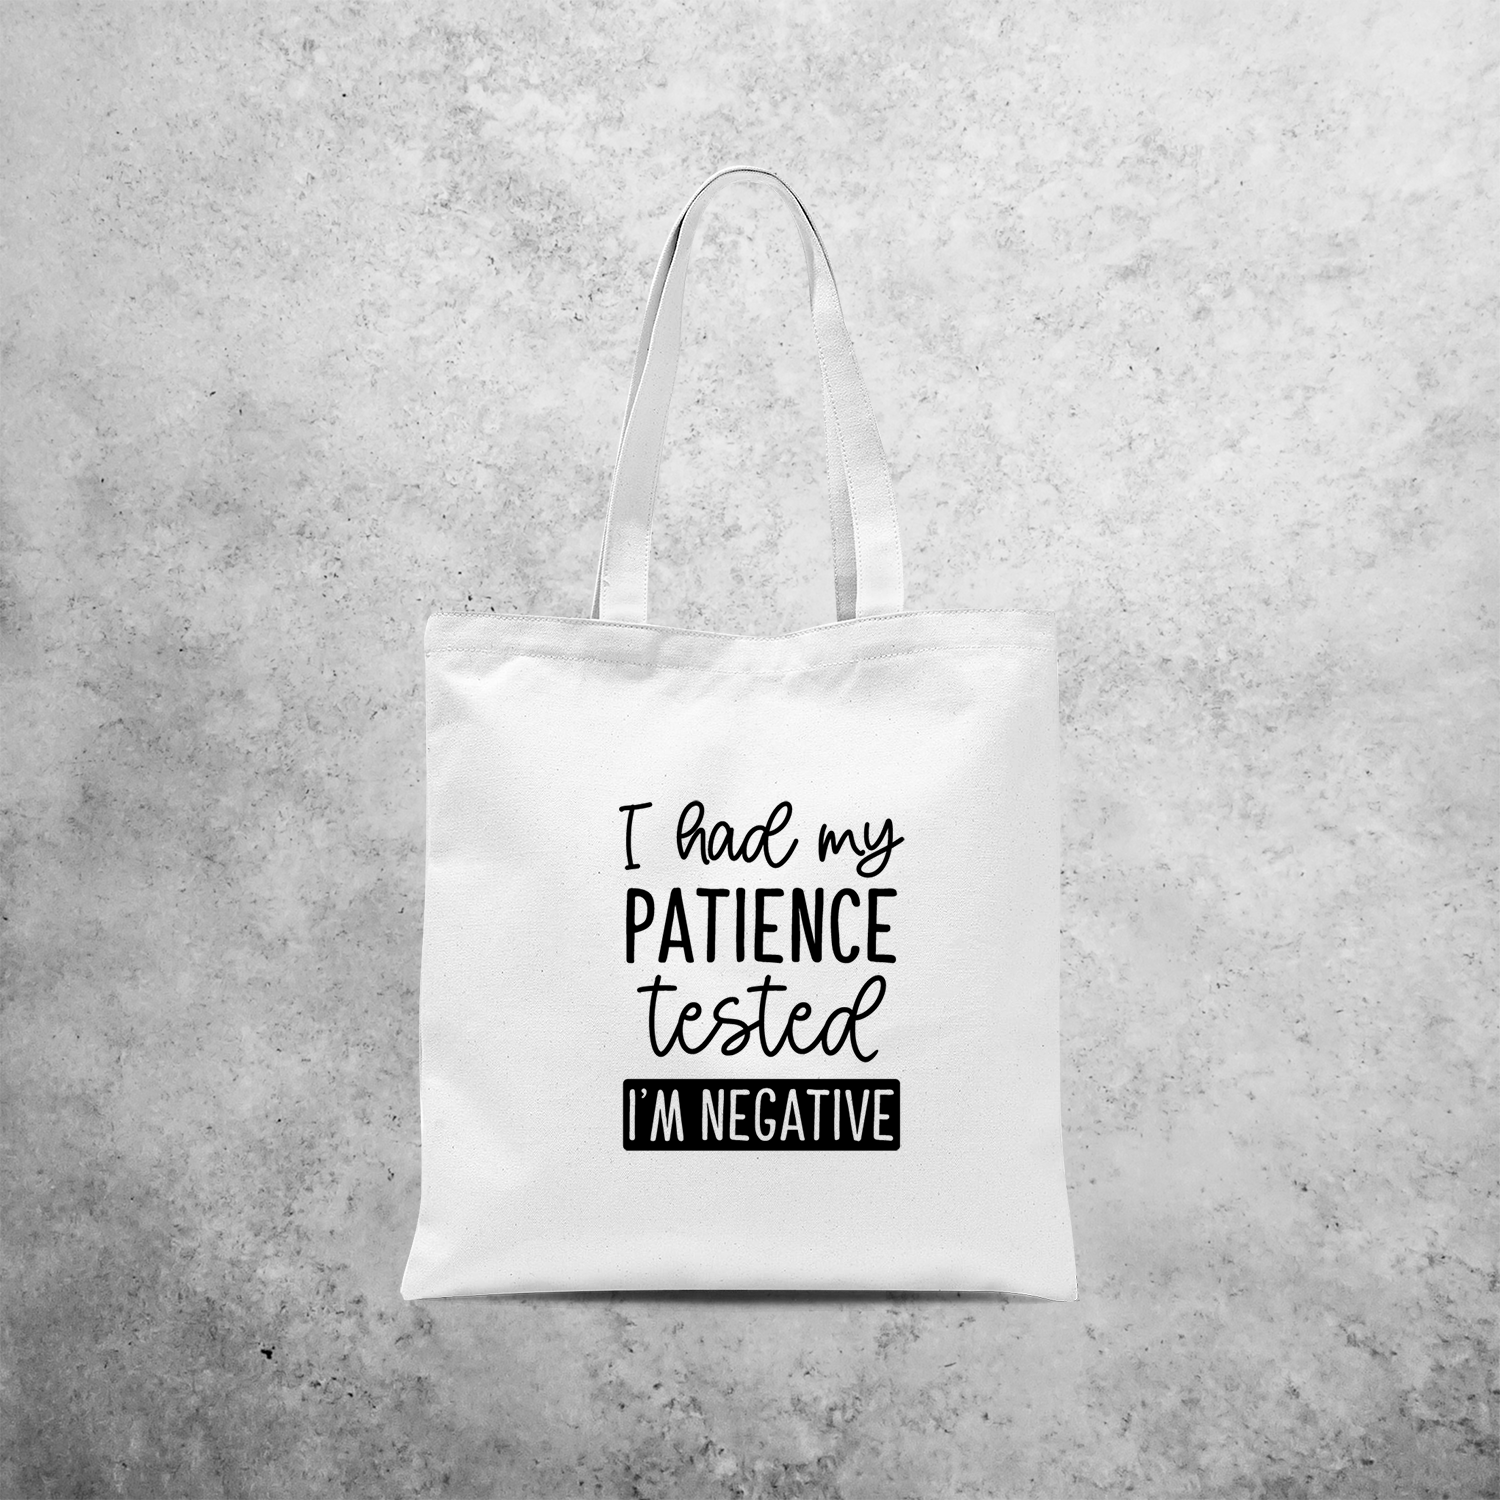 'I had my patience tested - I'm negative' tote bag